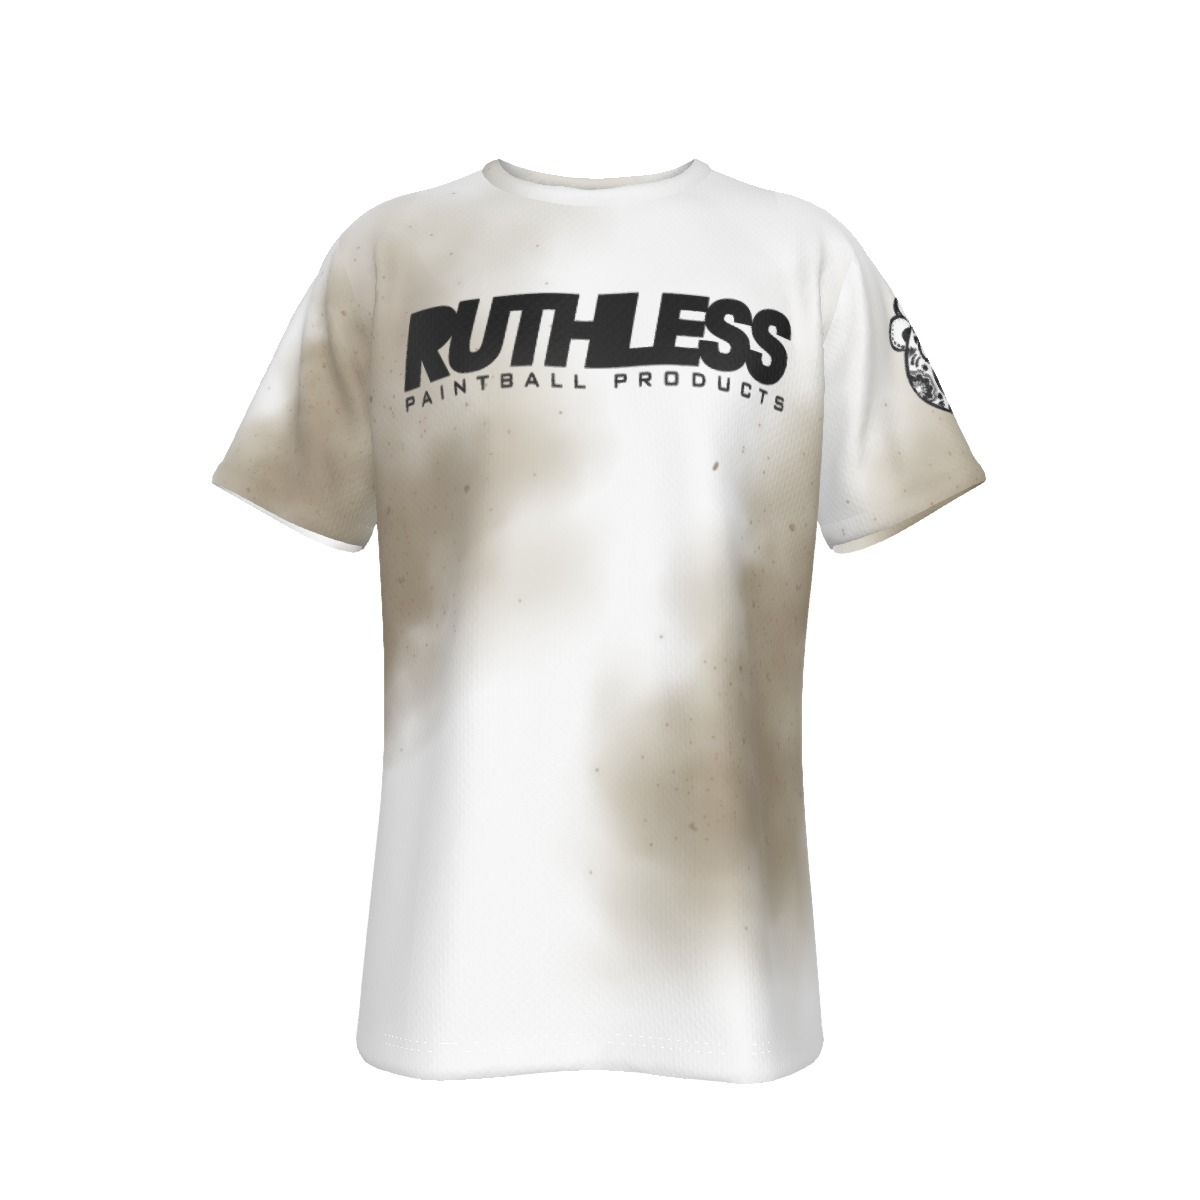 Racing Stripes Breeze Jersey – Ruthless Paintball Products